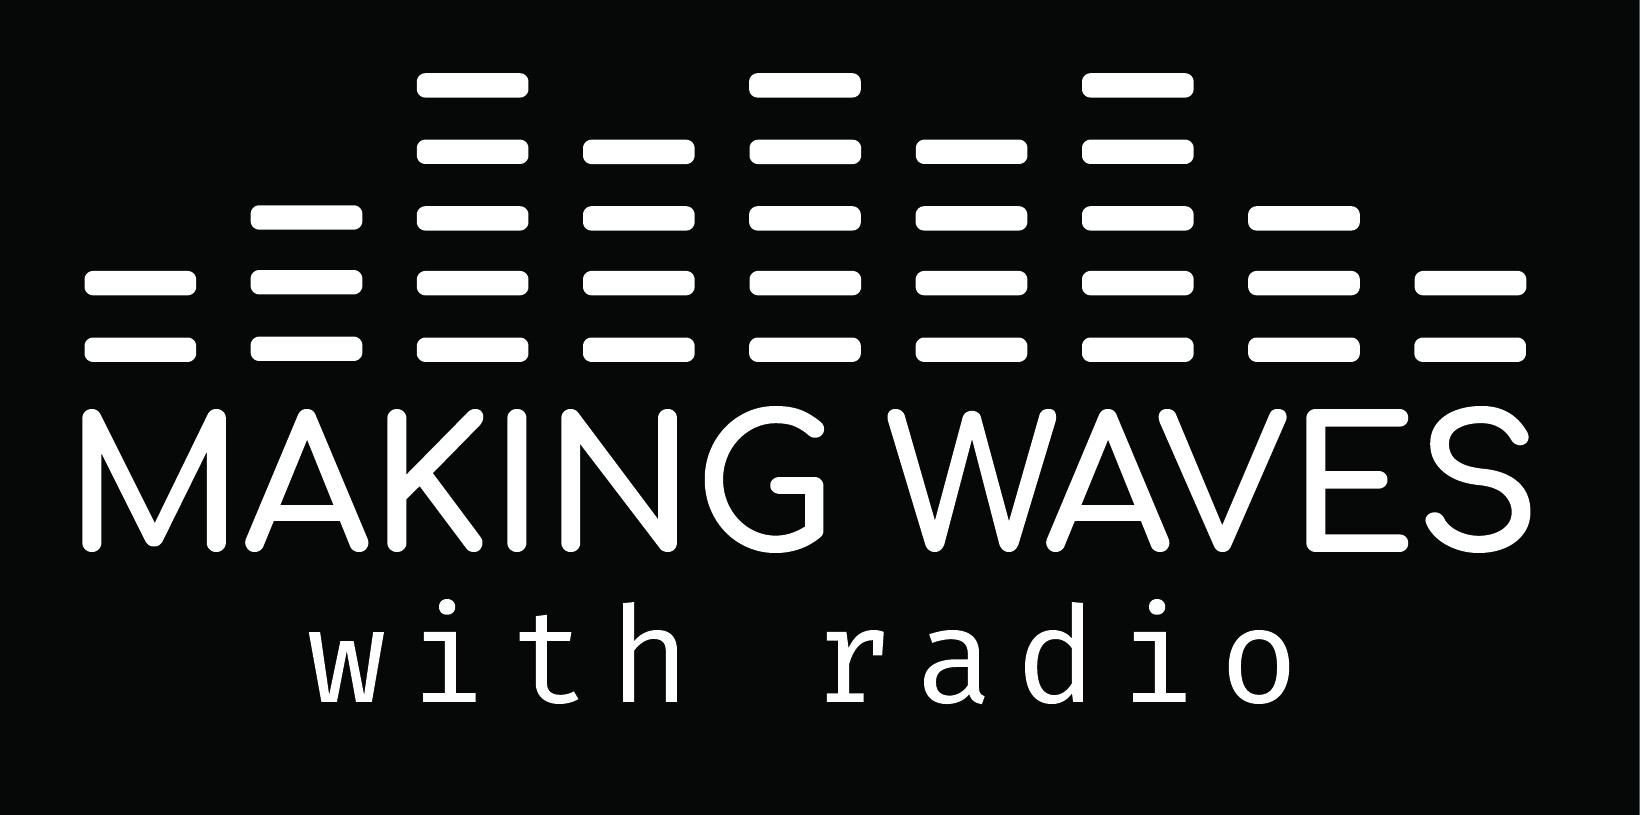 Making Waves with Radio logo with white text on black background JPG